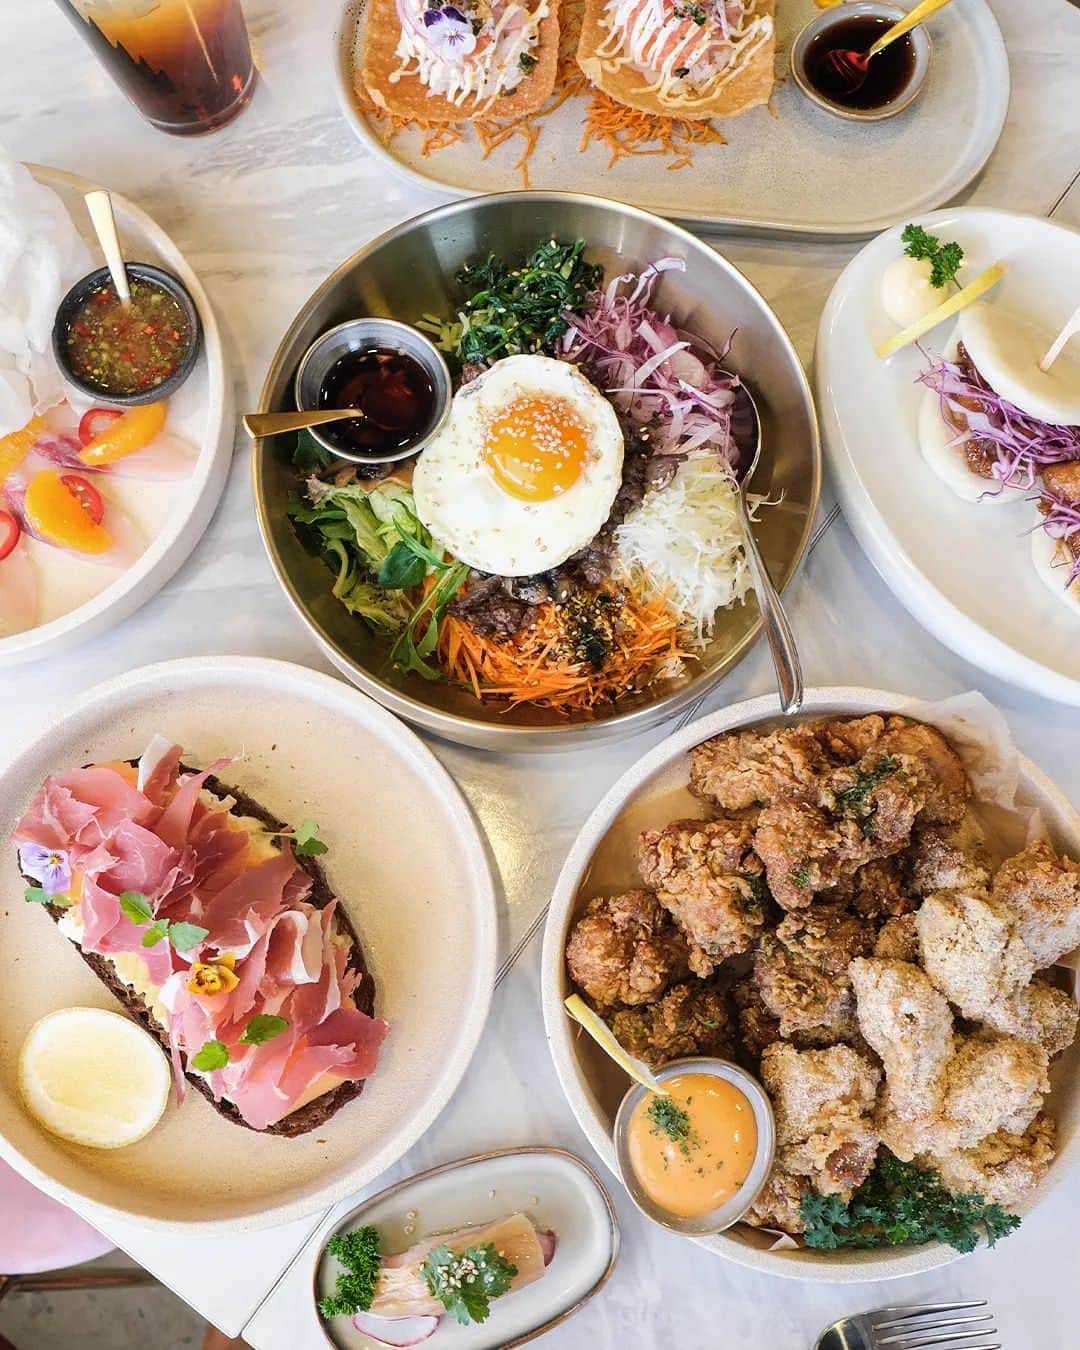 Erinaのインスタグラム：「Have you tried any cafes in Gordon?? I was so surprised that it has changed a lot and there were some decent cafes 🥰🥰  I visited the @missingspoon_sydney , and they serve the great Korean and Japanese brunch🇰🇷x🇯🇵  -Deluxe Nigiri Palette 🍣  -Bulgogi Bibim Bowl -Korean fried chicken 🍗  -Salmon taco🌮  -Teriyaki chicken bao -Kingfish carpacio 🍊 -Honey Prosciutto Melon Open Toast🍈🥖」